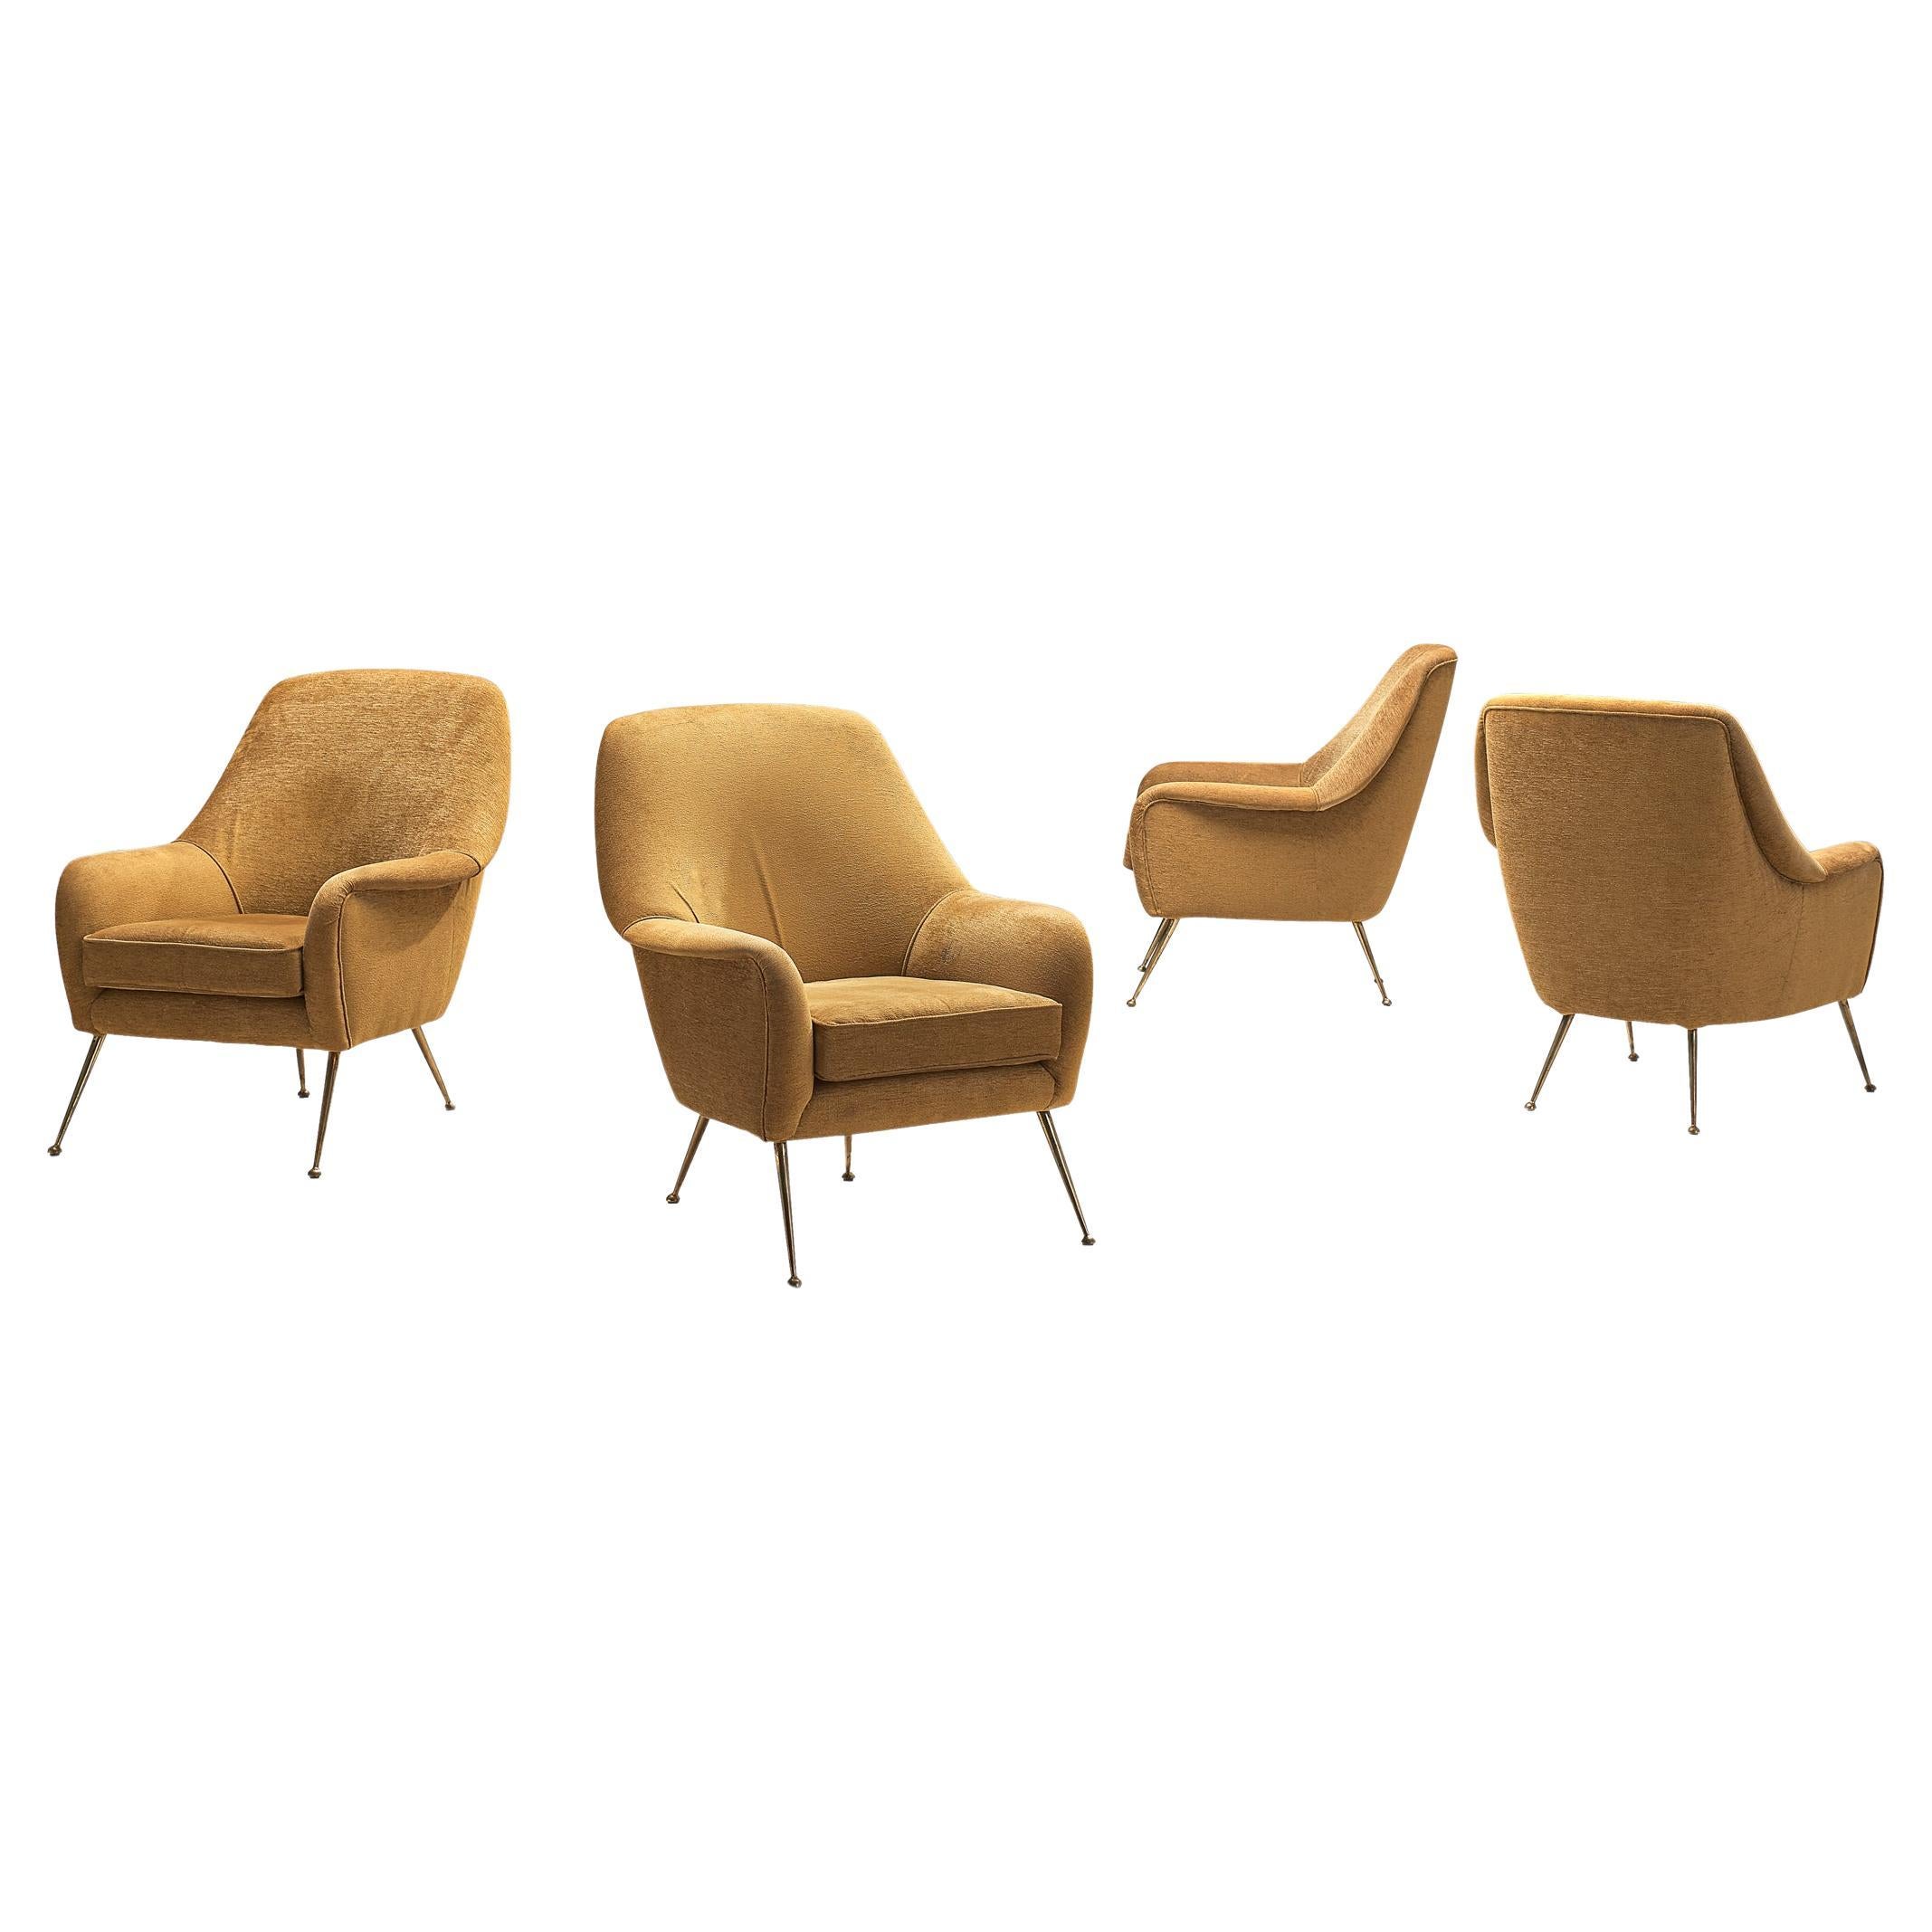 Elegant Italian Lounge Chairs in Brass and Beige Camel Upholstery  For Sale